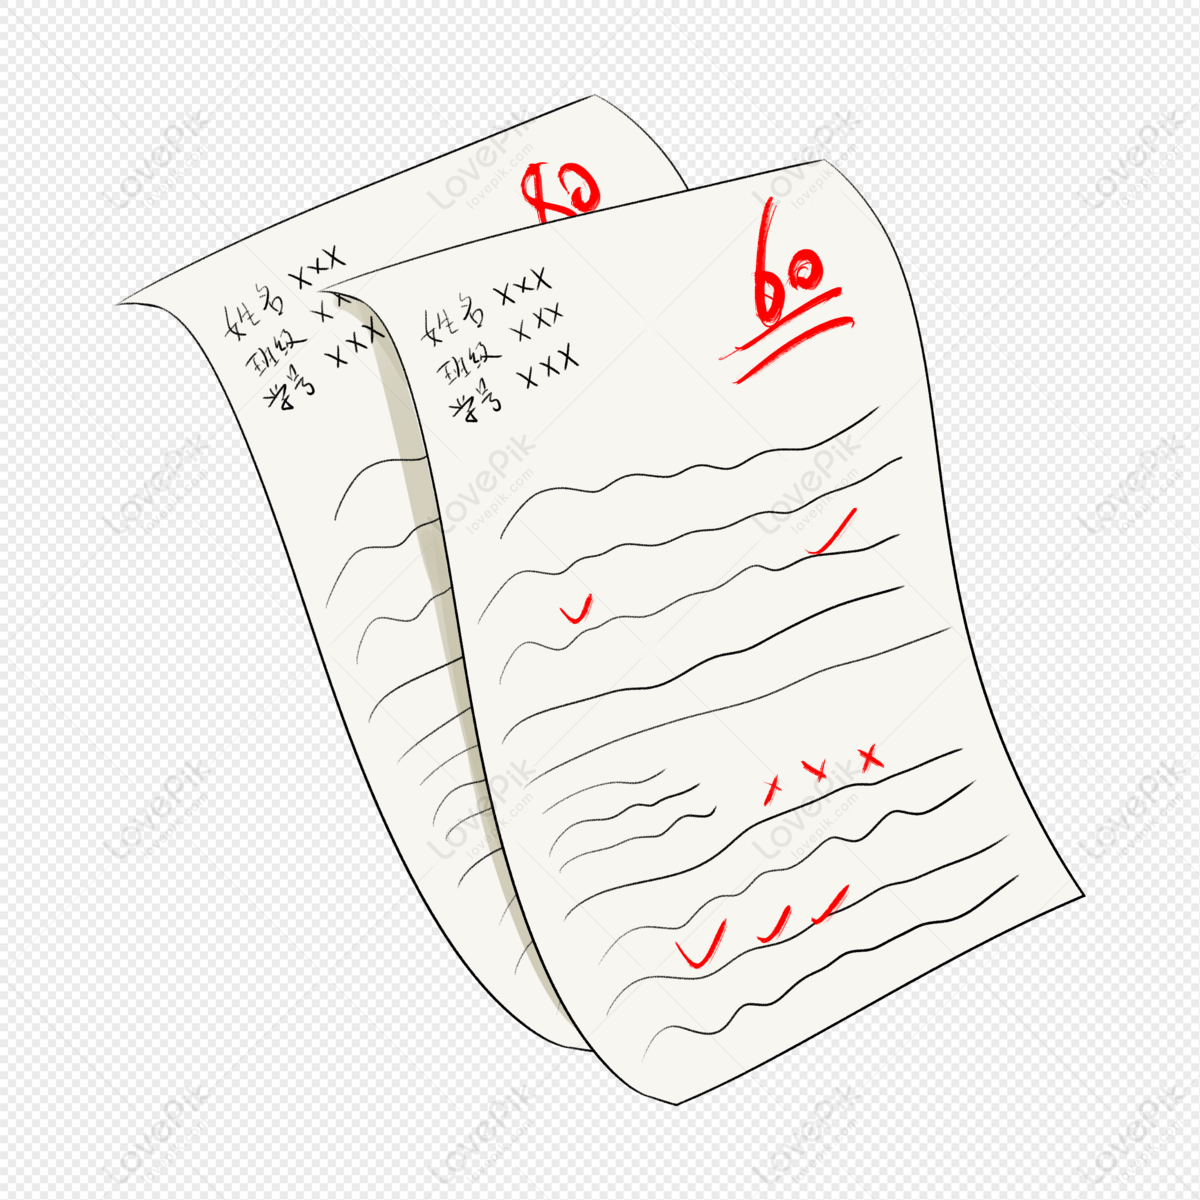 Test Paper PNG Image Free Download And Clipart Image For Free Download -  Lovepik | 401748501